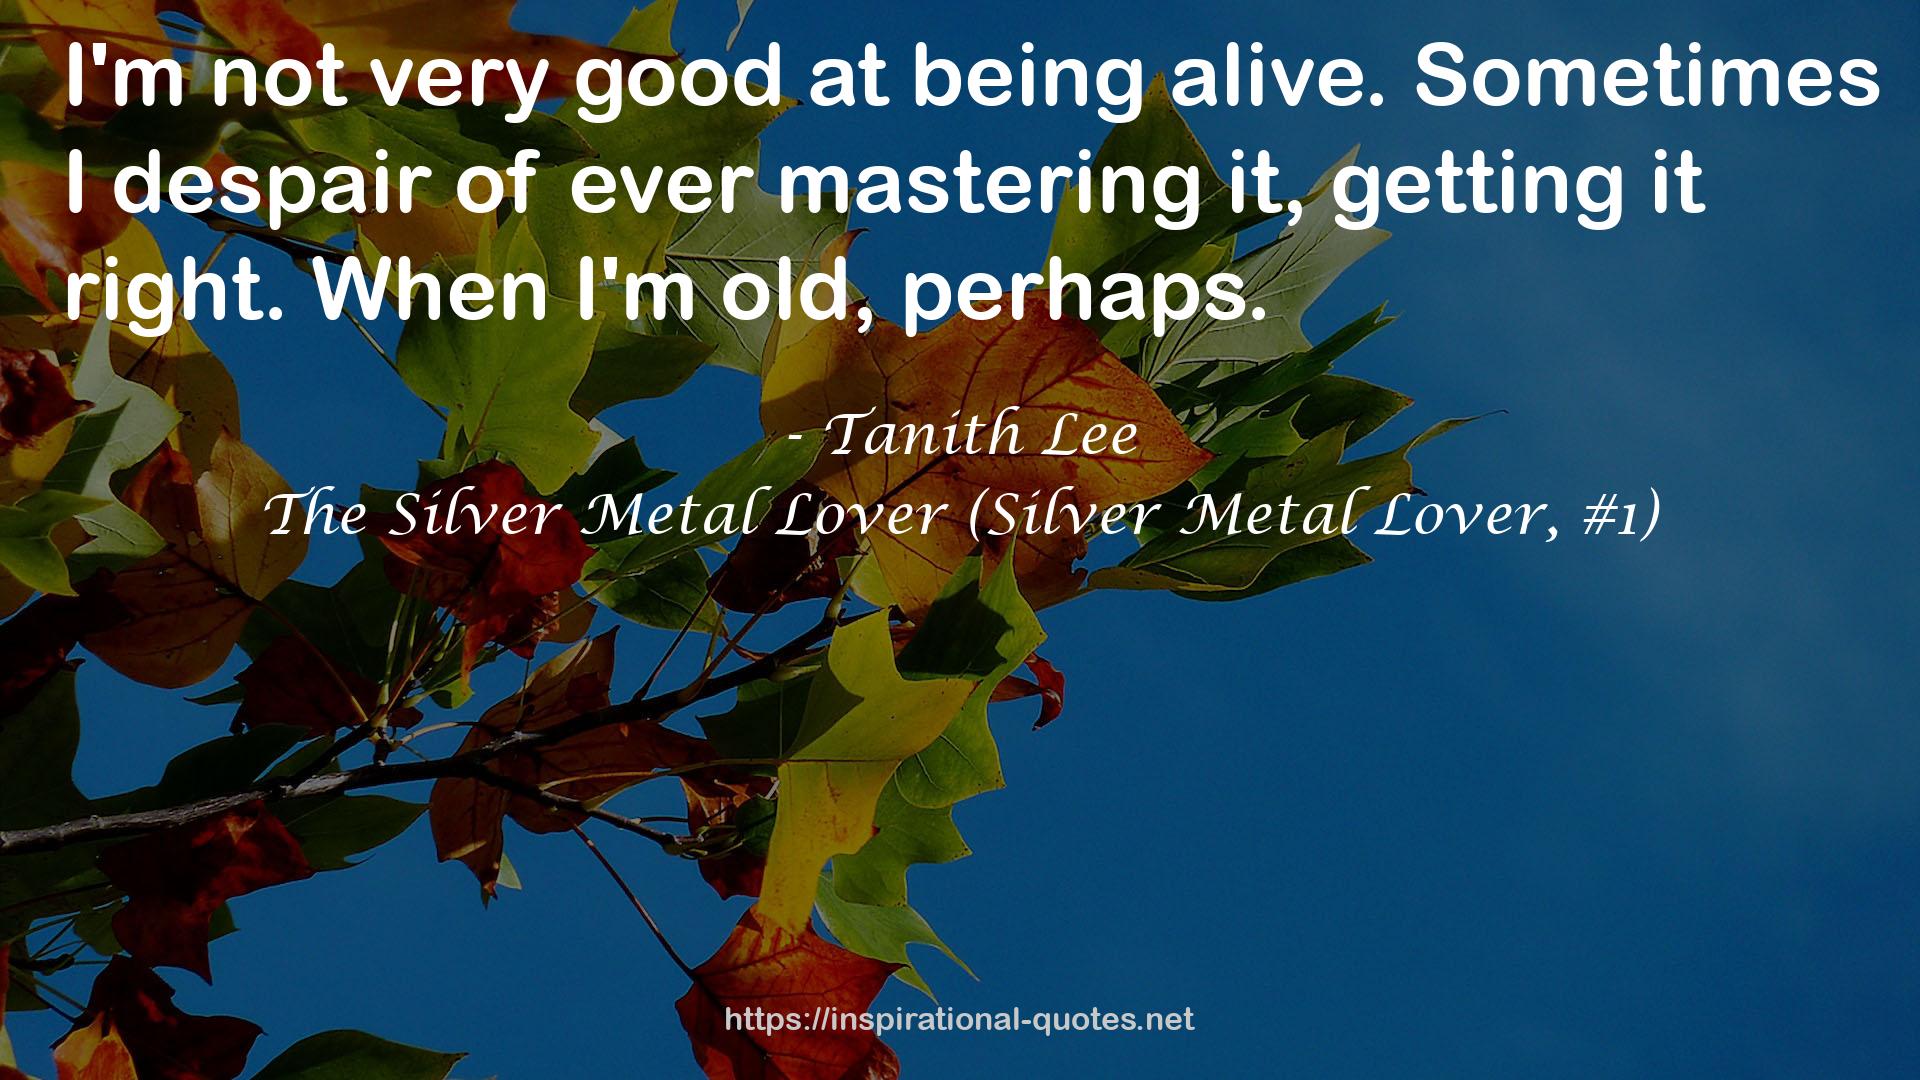 The Silver Metal Lover (Silver Metal Lover, #1) QUOTES